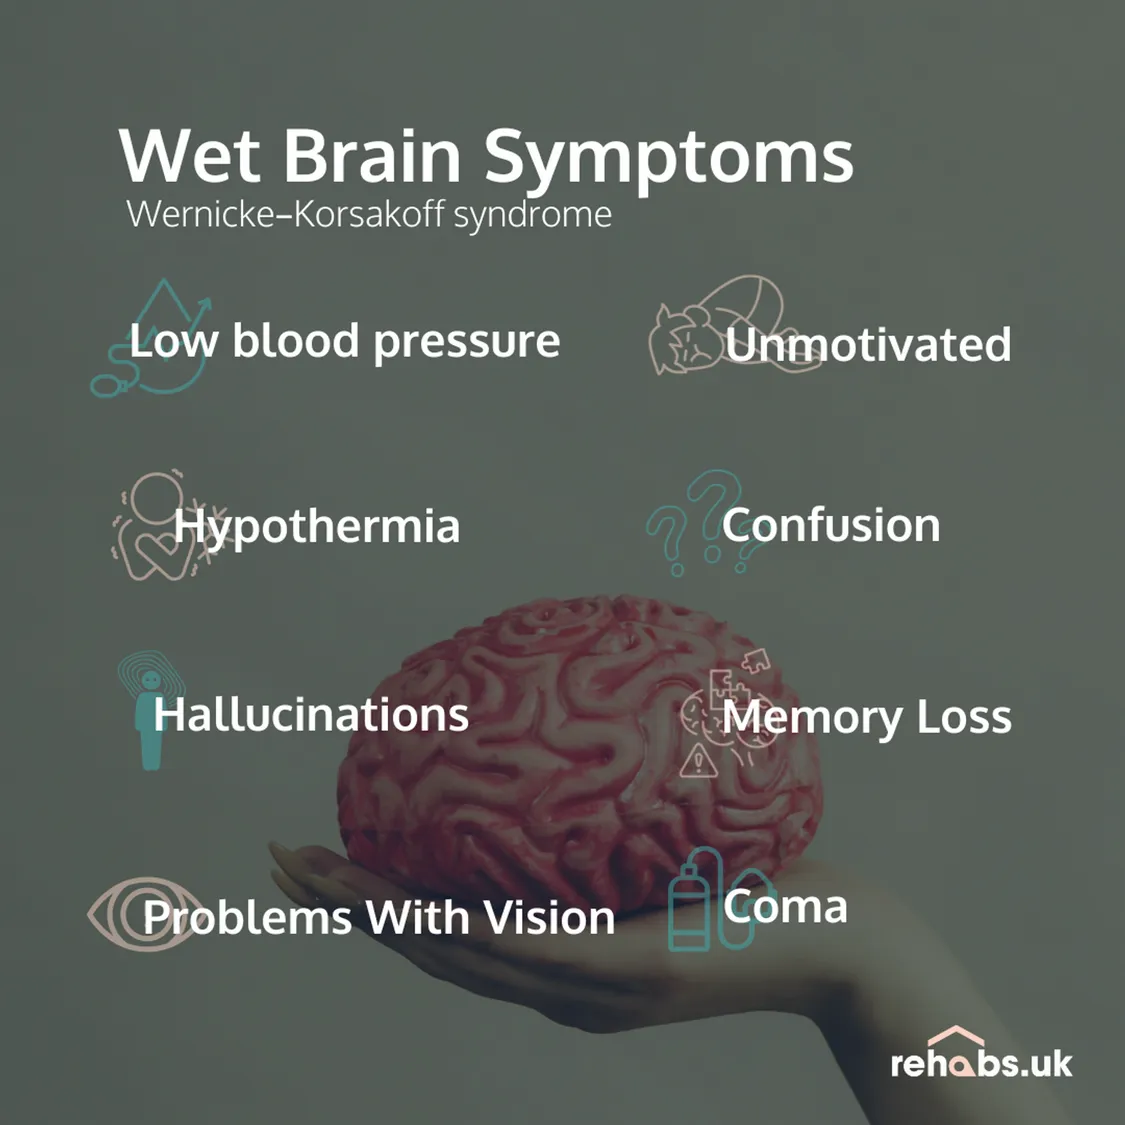 Infographic showing the symptoms of Wet Brain Syndrome also known as Wernicke-Korsakoff syndrome.